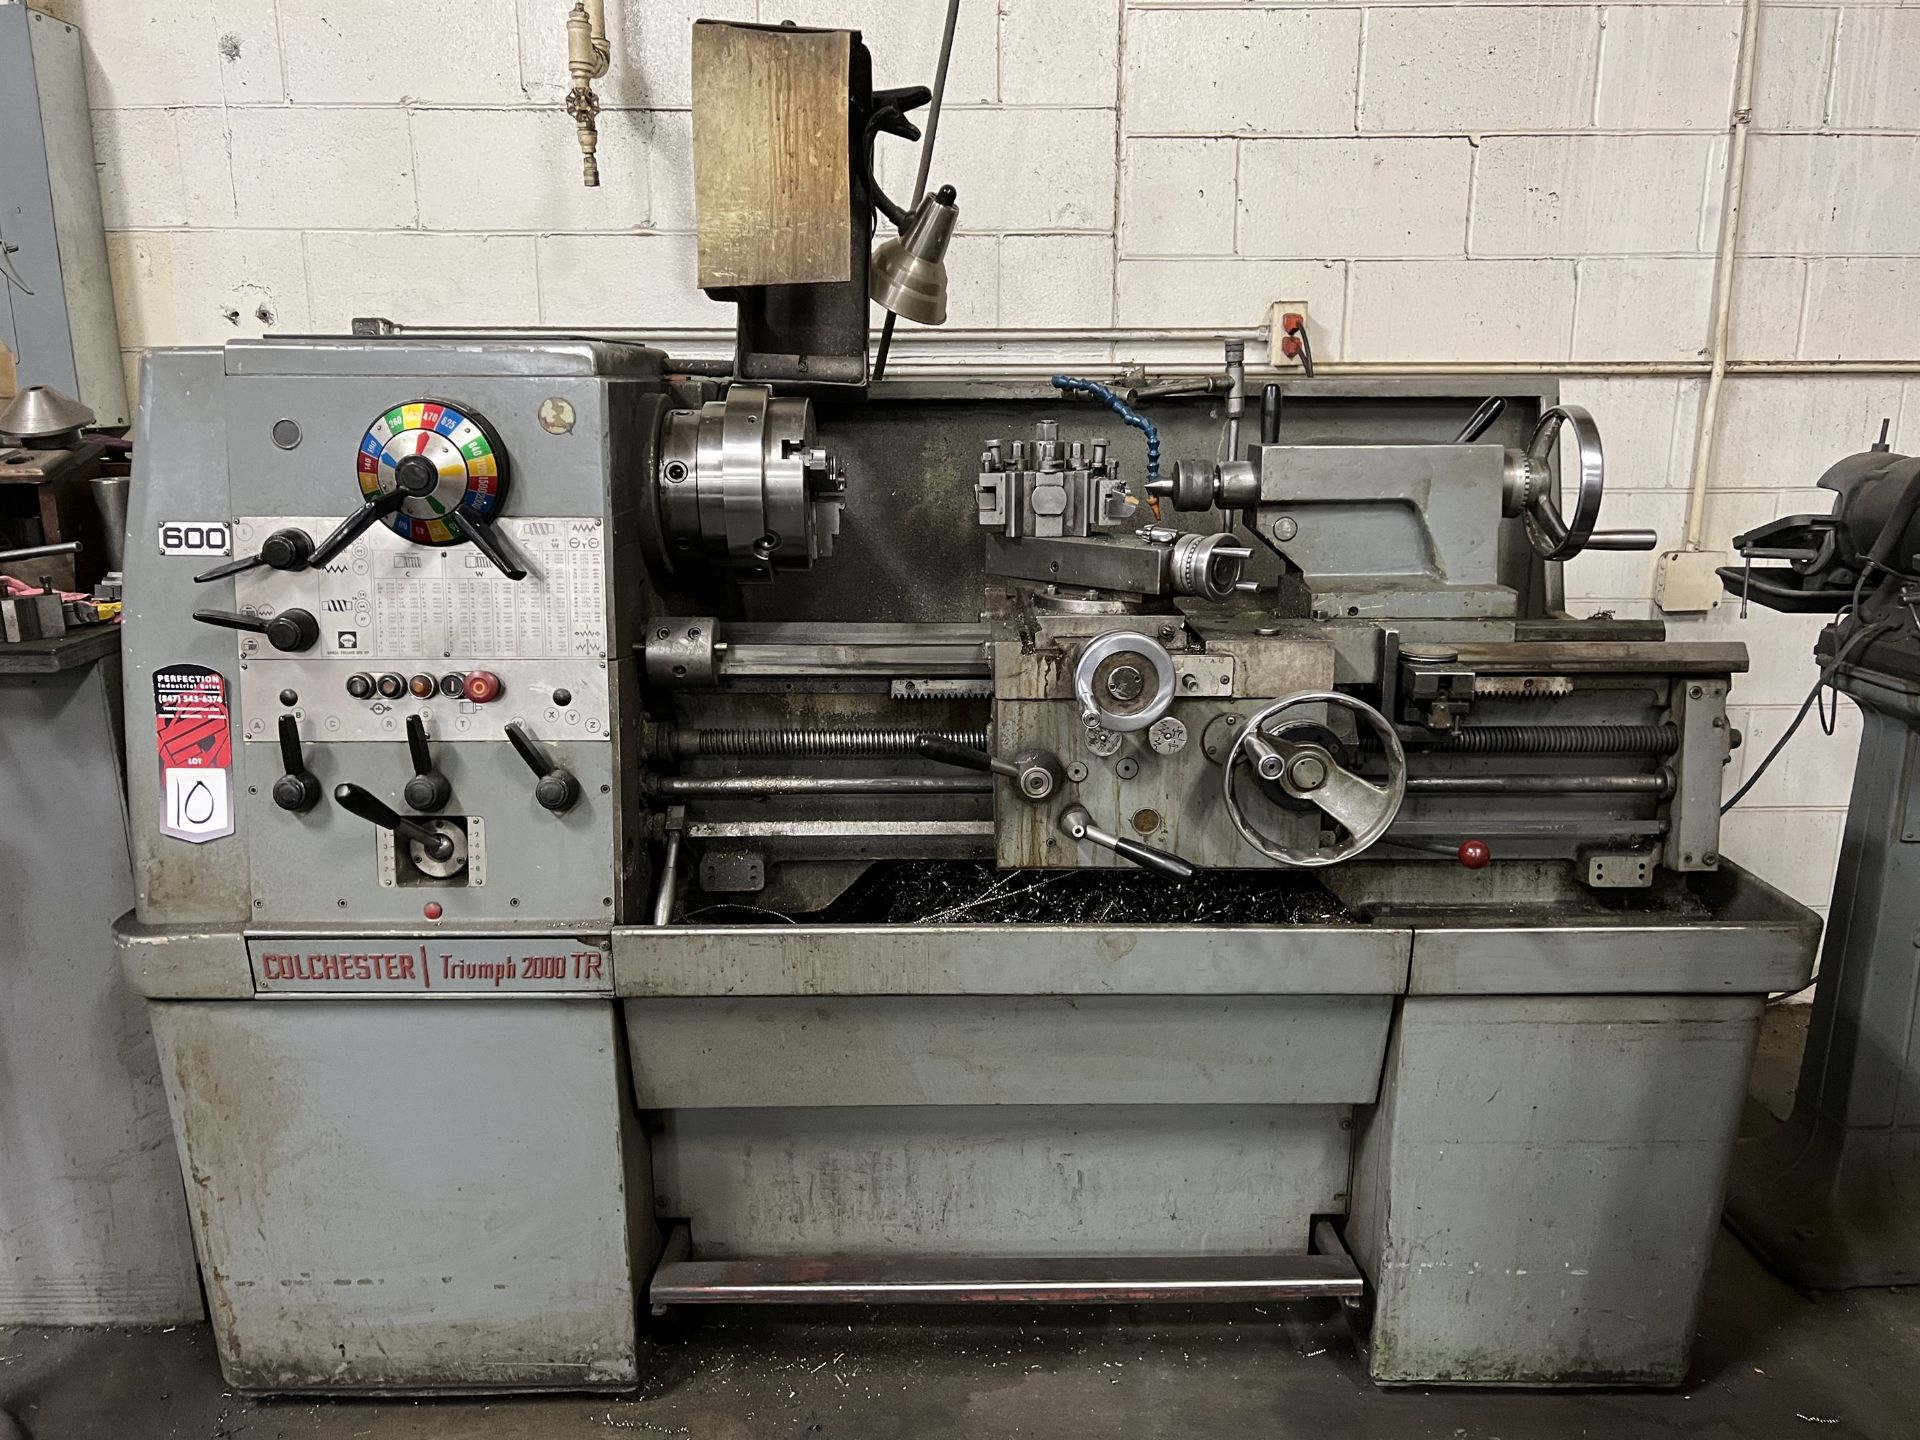 CLAUSING COLCHESTER TRIUMPH 2000 TR Lathe, s/n na, 25-2000 RPM, 8" 3-Jaw Chuck, Tool Post, Tailstock